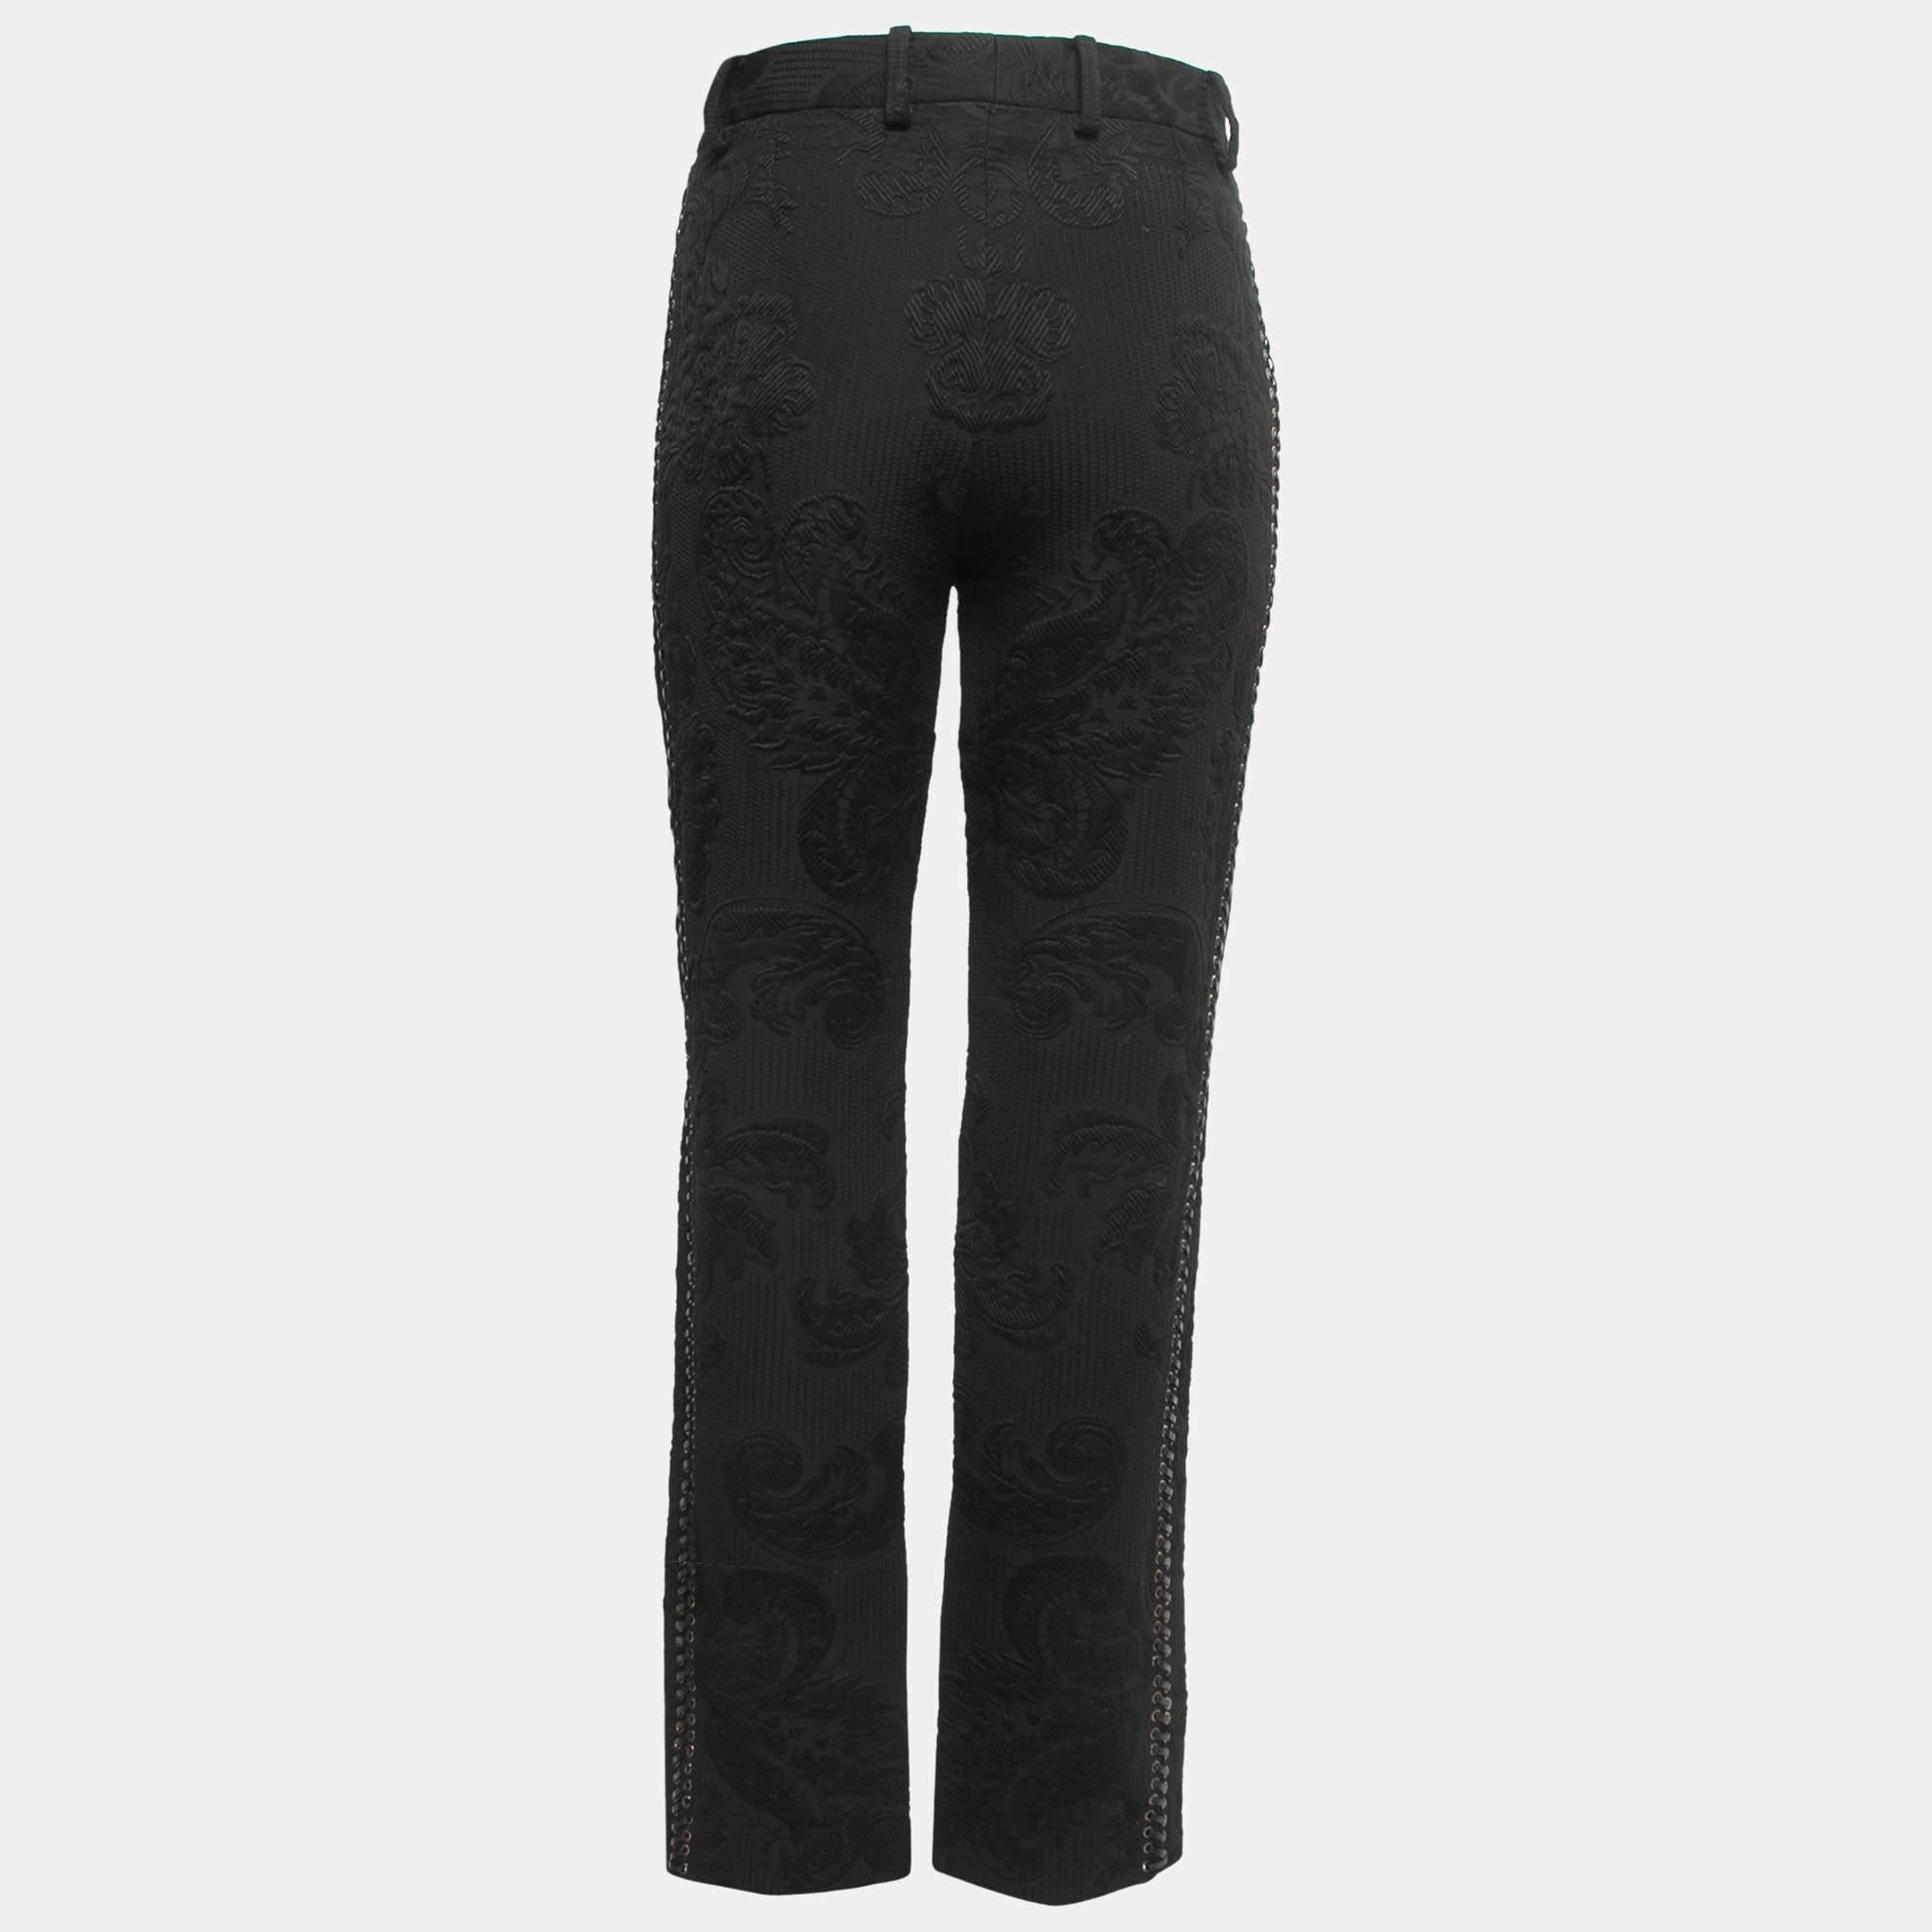 How stylish and classy are these pants! Made from quality fabrics and styled into a great fit, complement these pants with a chic crop top.

Includes: Price Tag